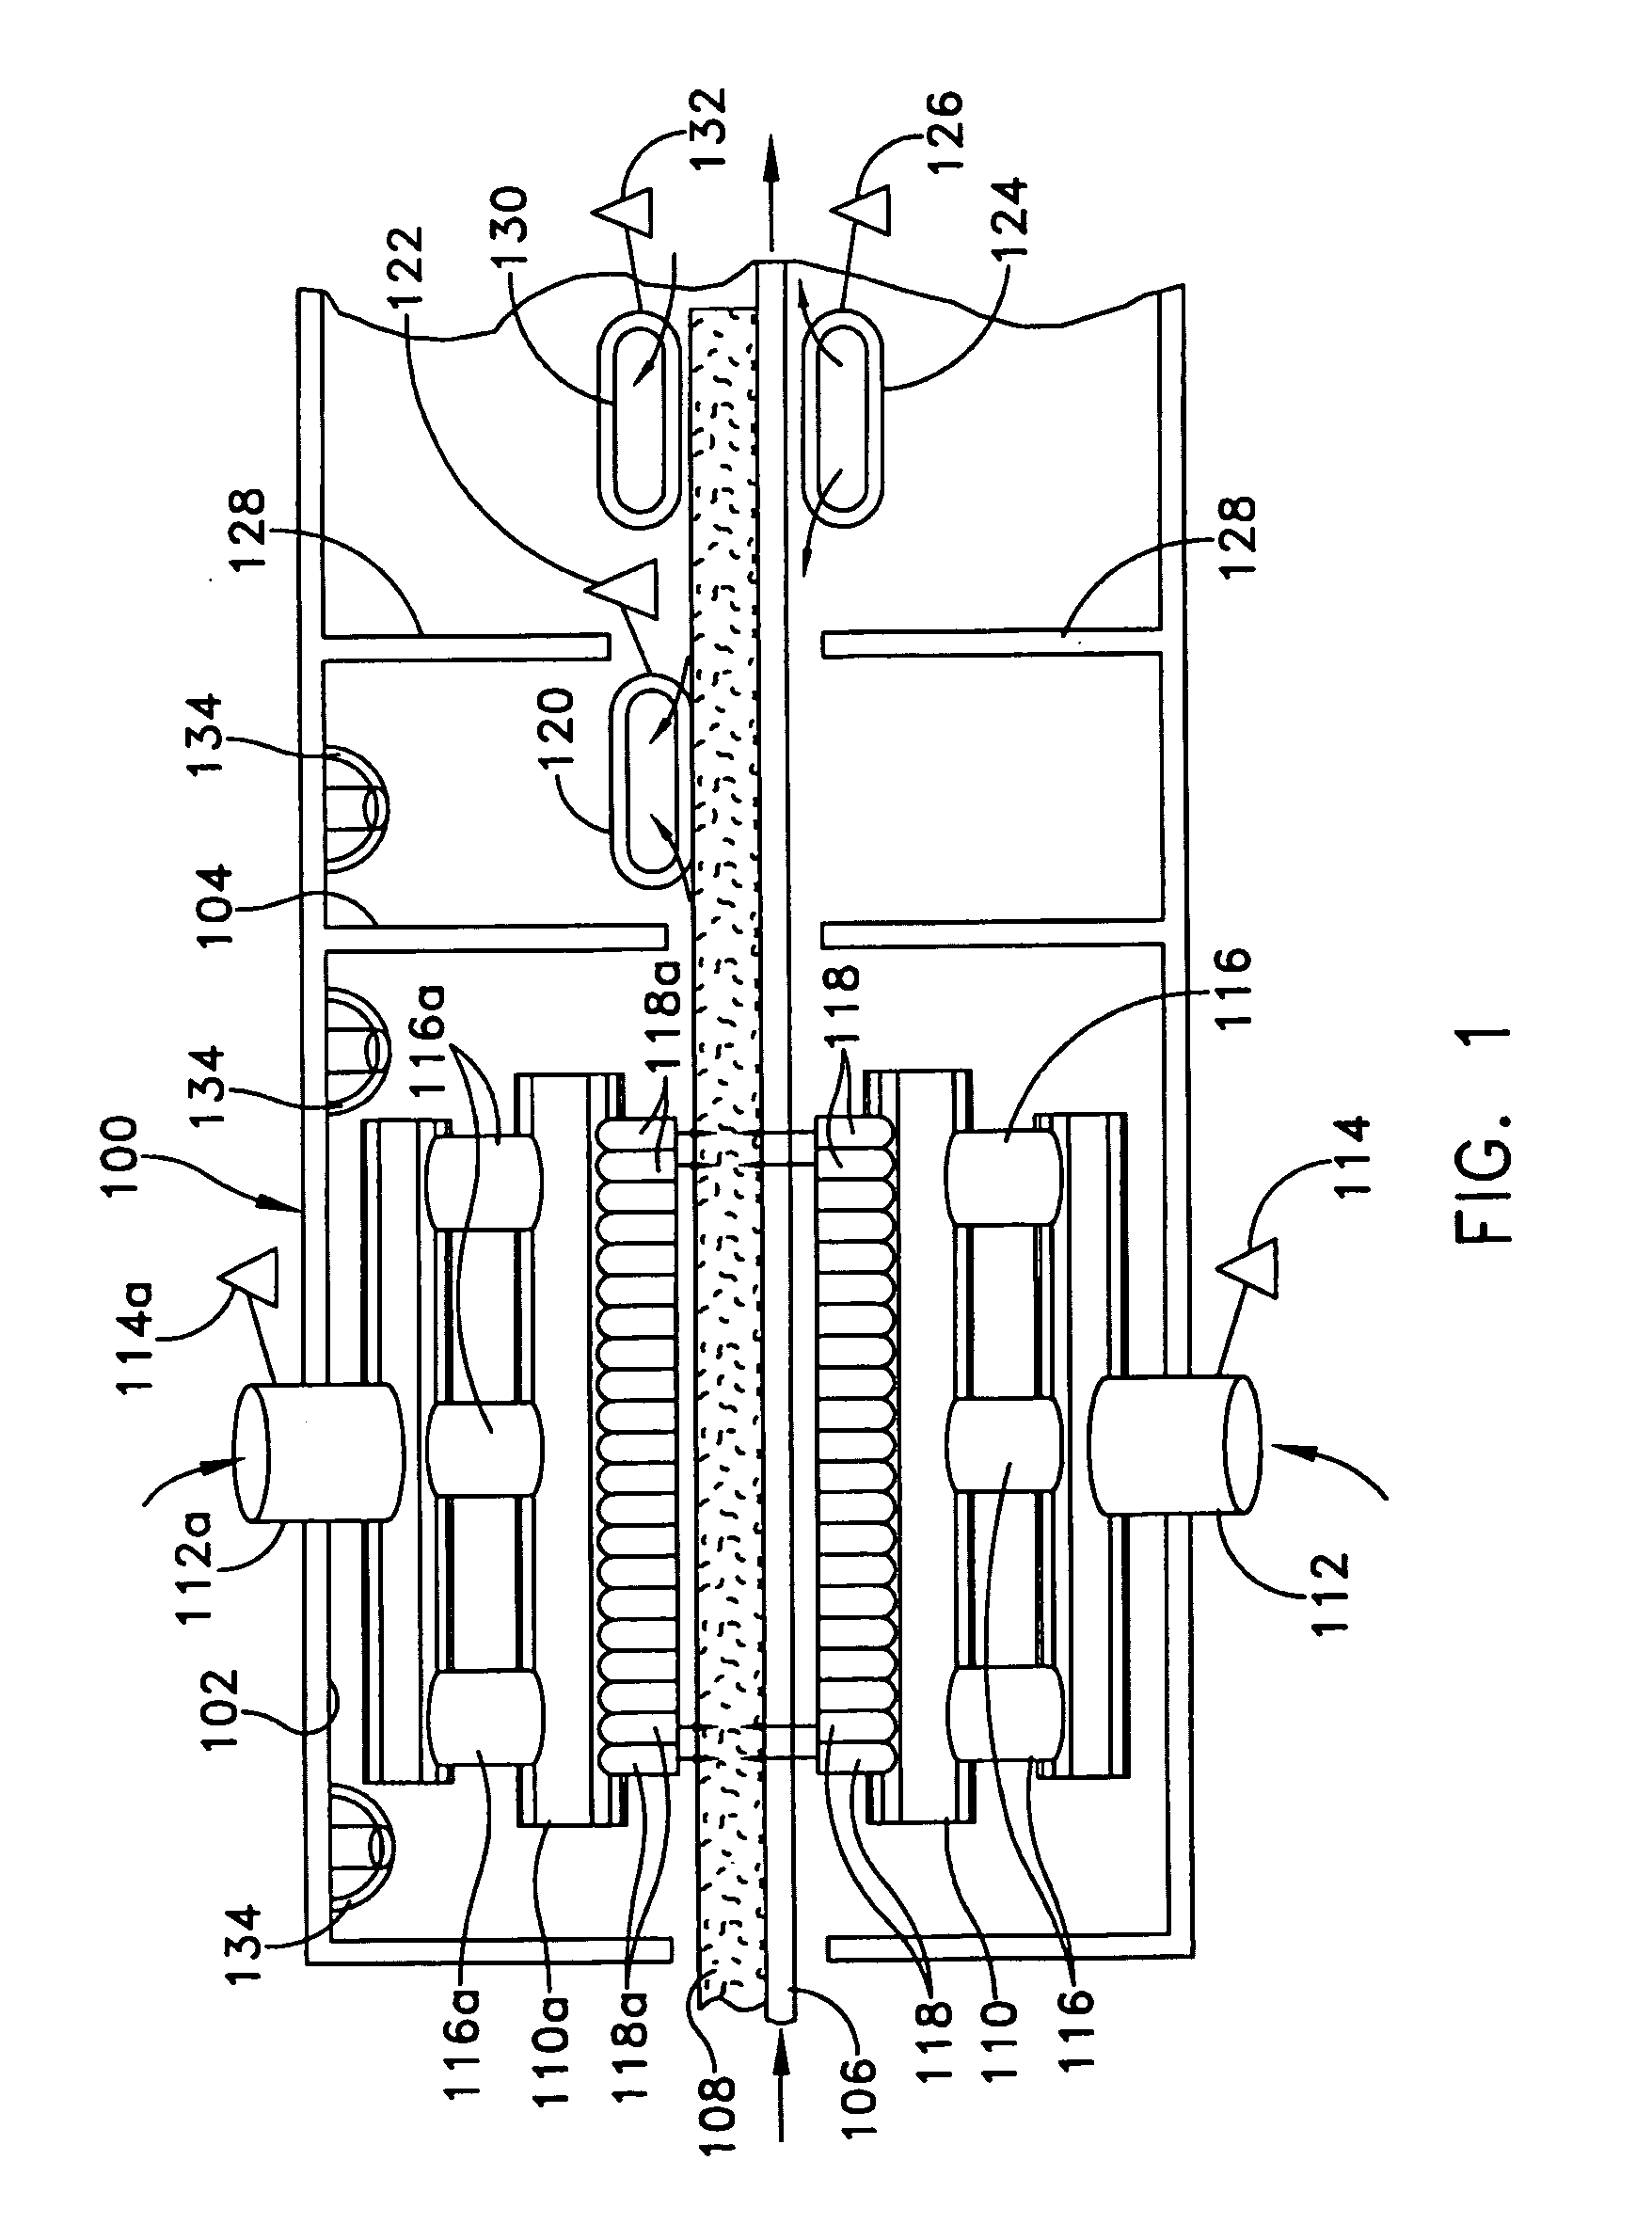 Method for curing a binder on insulation fibers